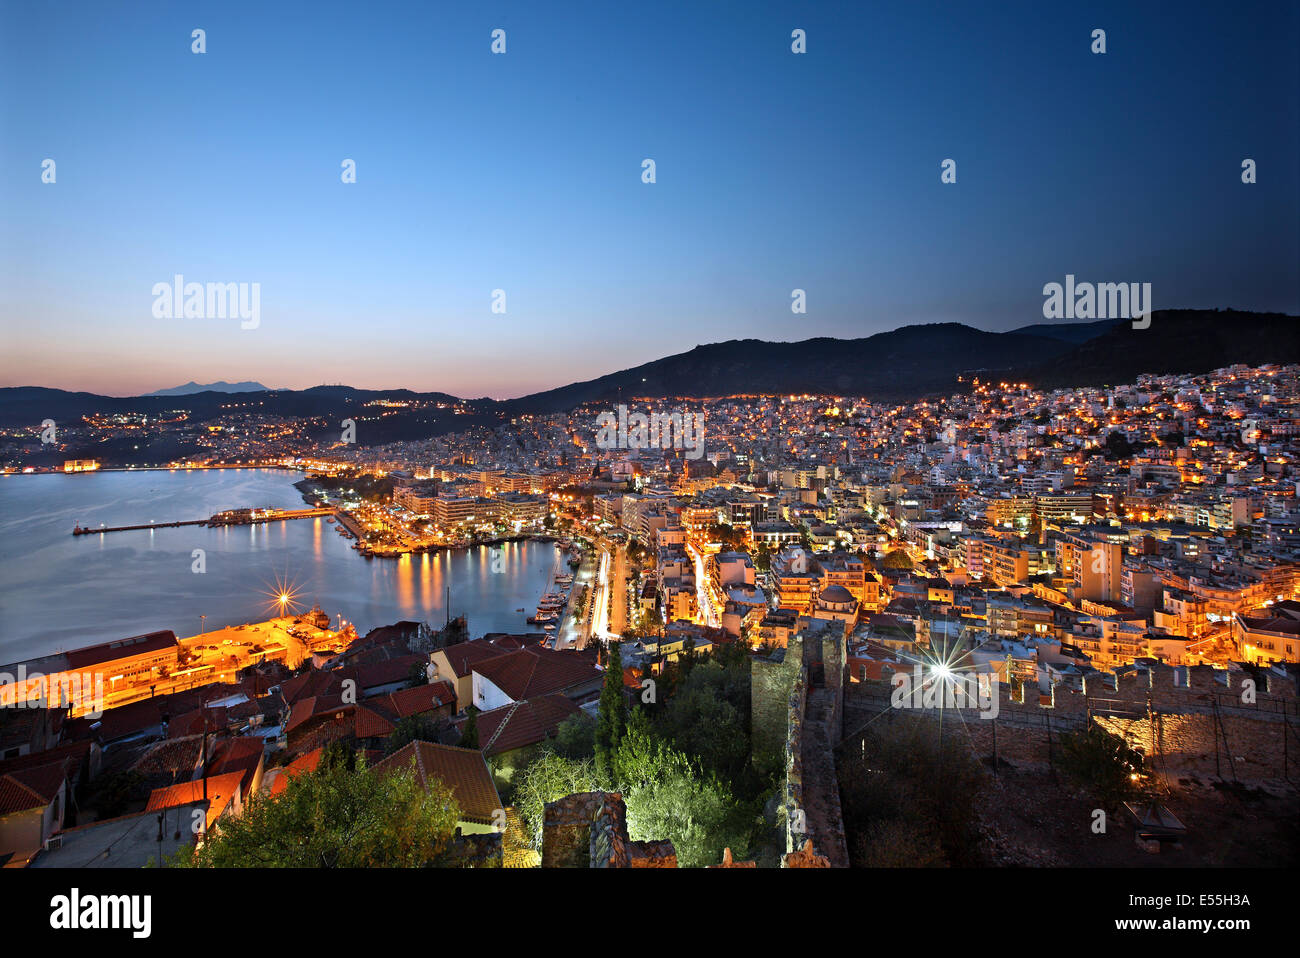 Panoramic night view of the port of Kavala from the castle of the city. you can see both the old and the modern part of Kavala. Stock Photo